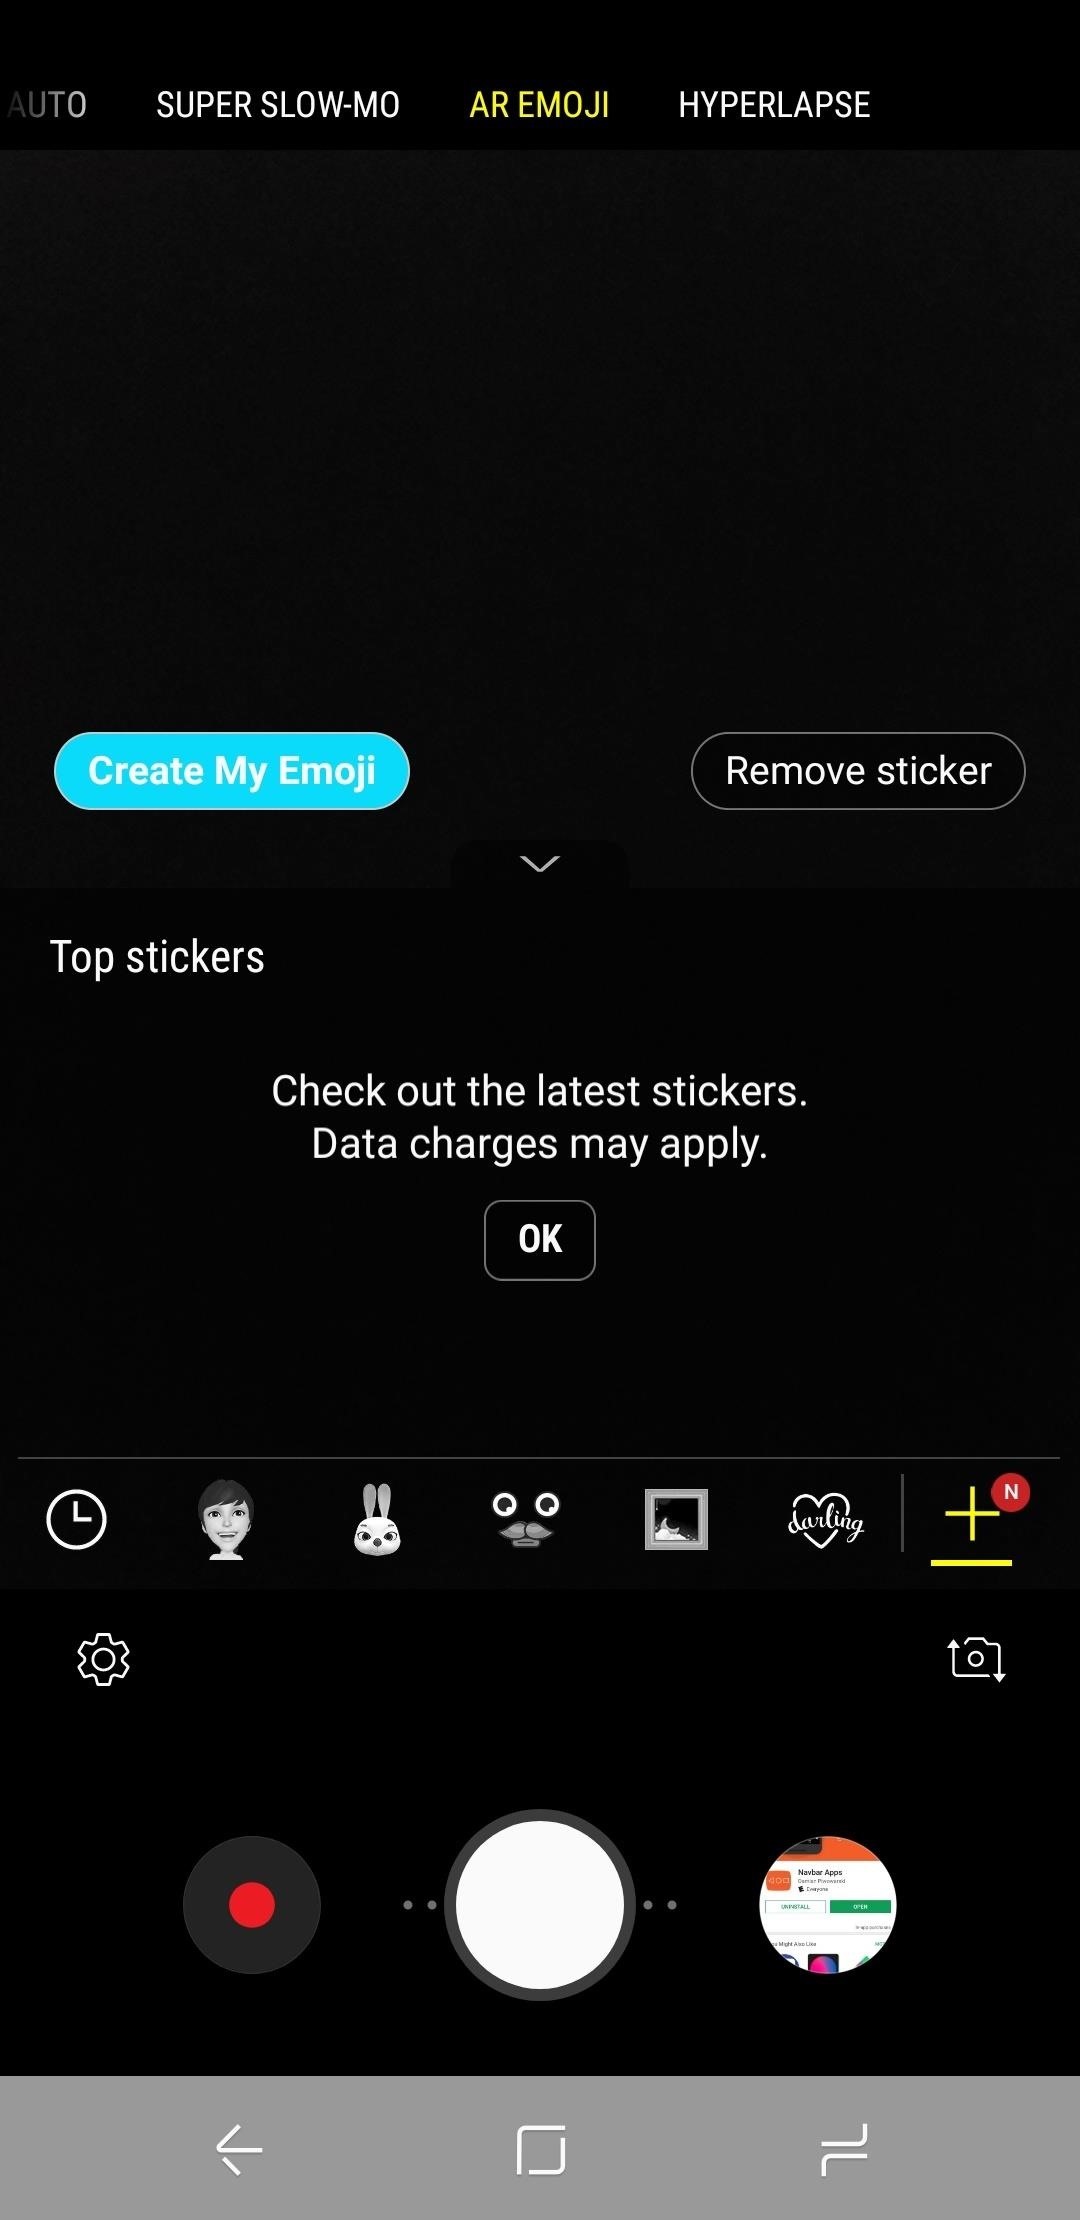 How to Add Mickey Mouse & Other Custom AR Emojis to Your Galaxy S9